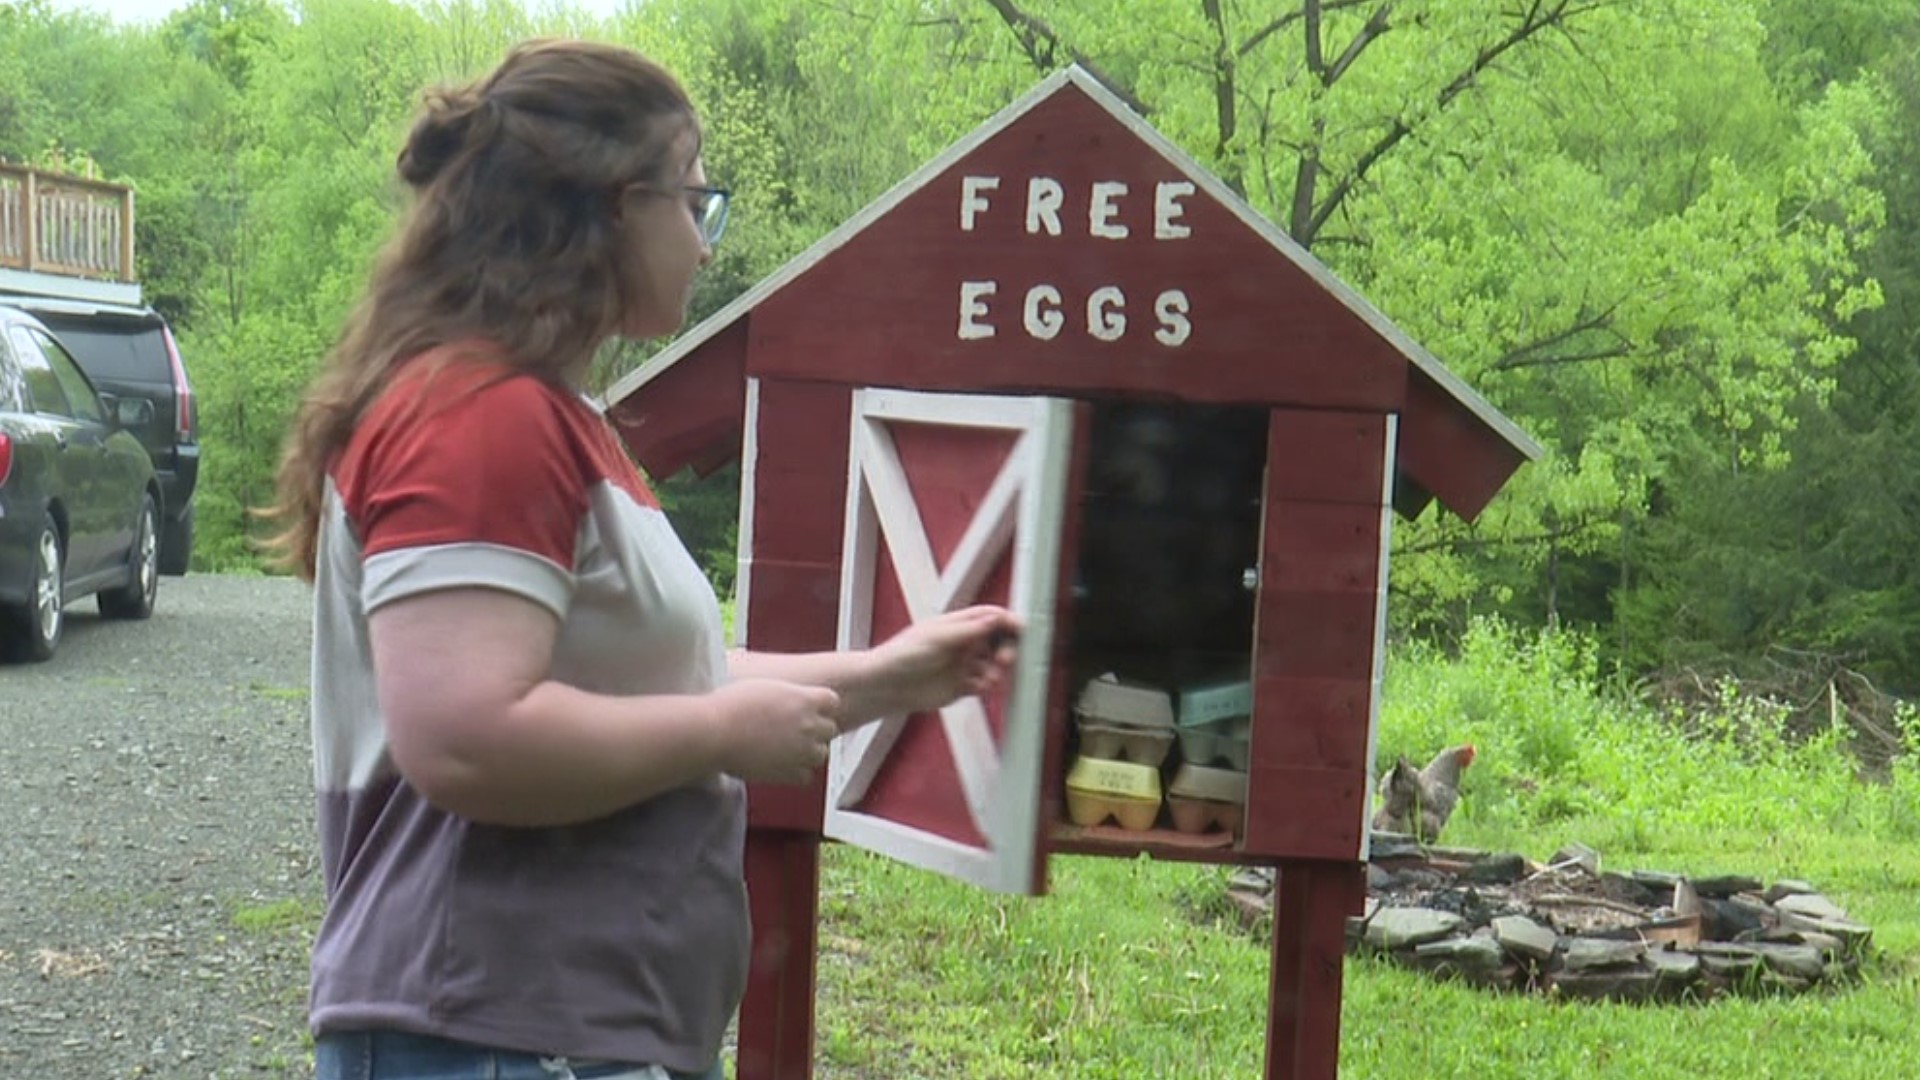 From gas to food to products, we're all feeling the crush of inflation. A family in South Gibson is sharing their eggs to help families with food costs.